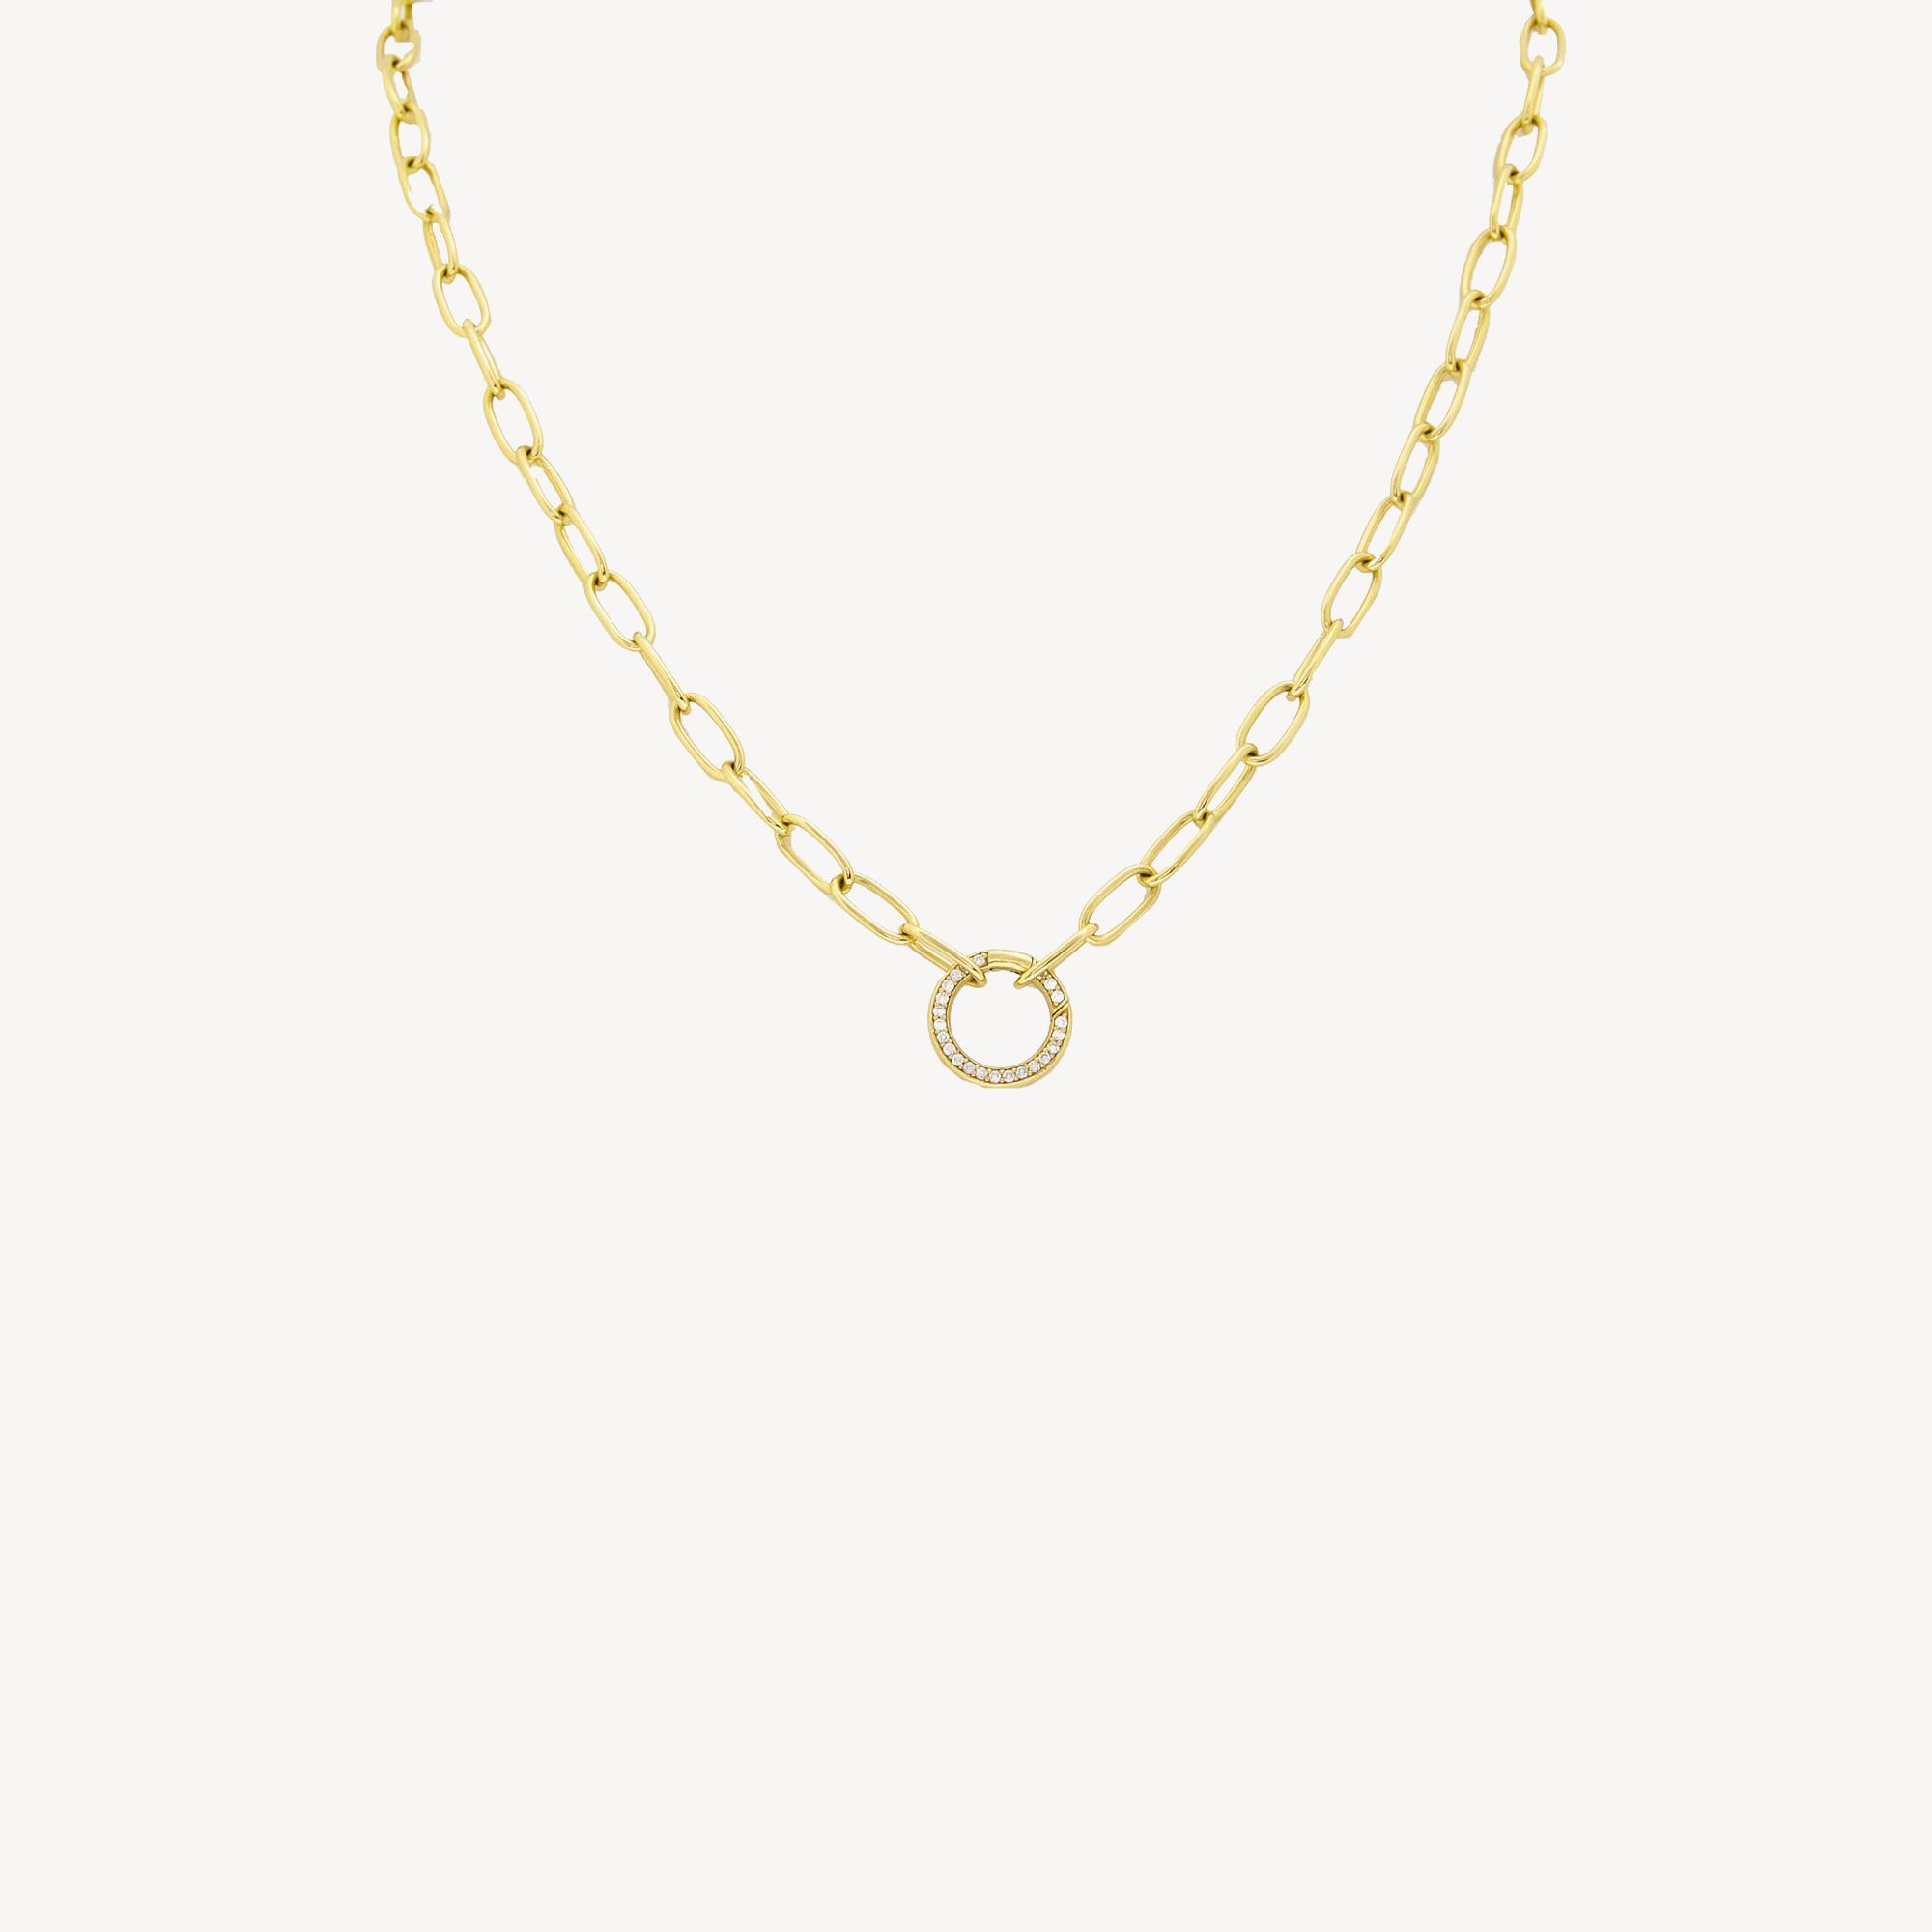 Sardinia Chain 2 with Pave Clasp Yellow Gold